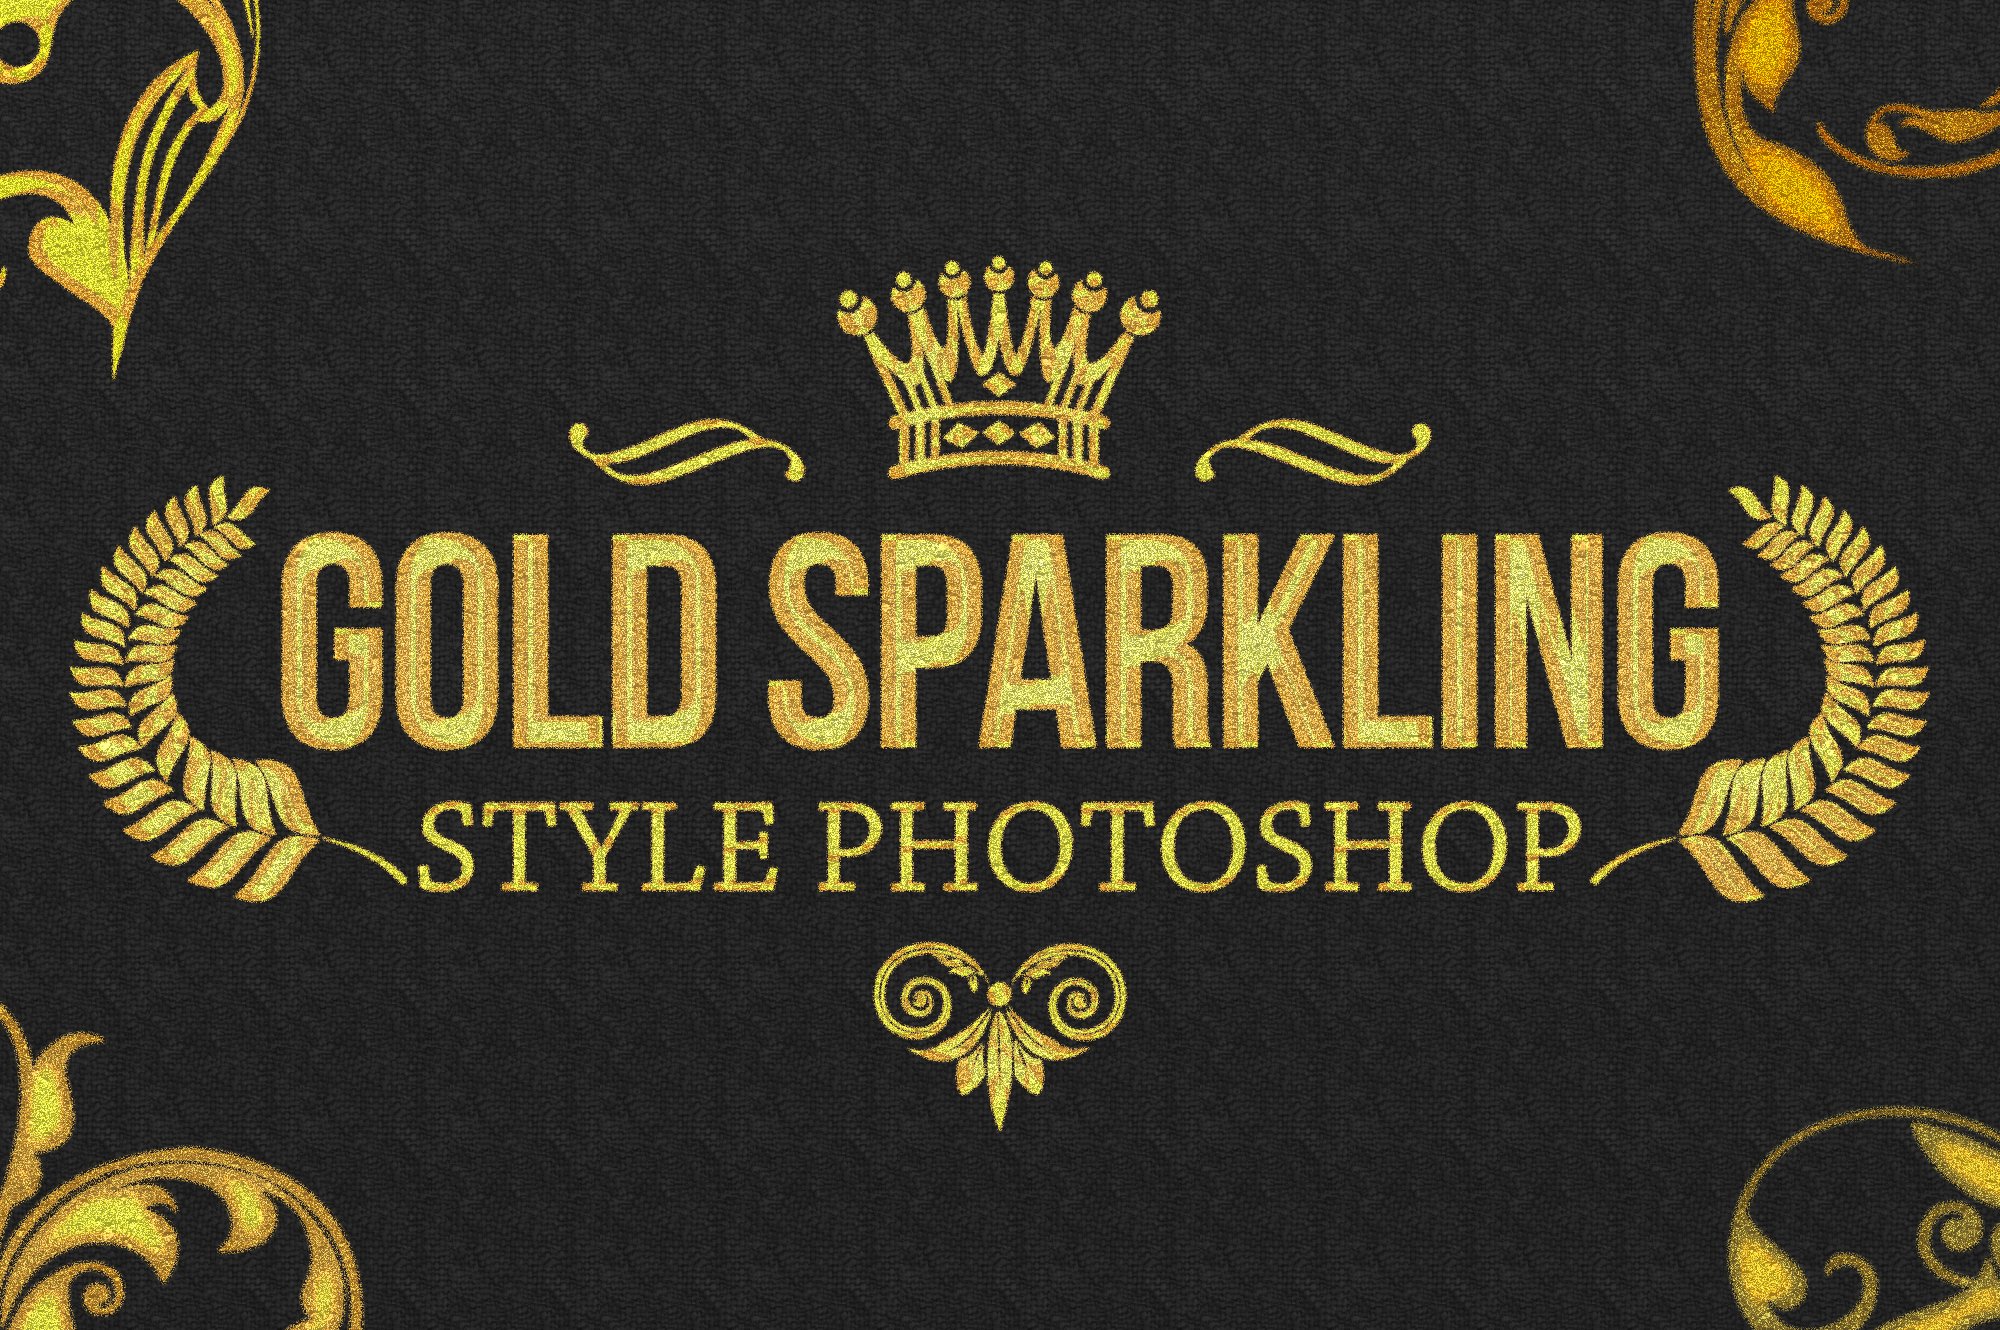 36 Gold Sparkling Style Photoshop V2preview image.